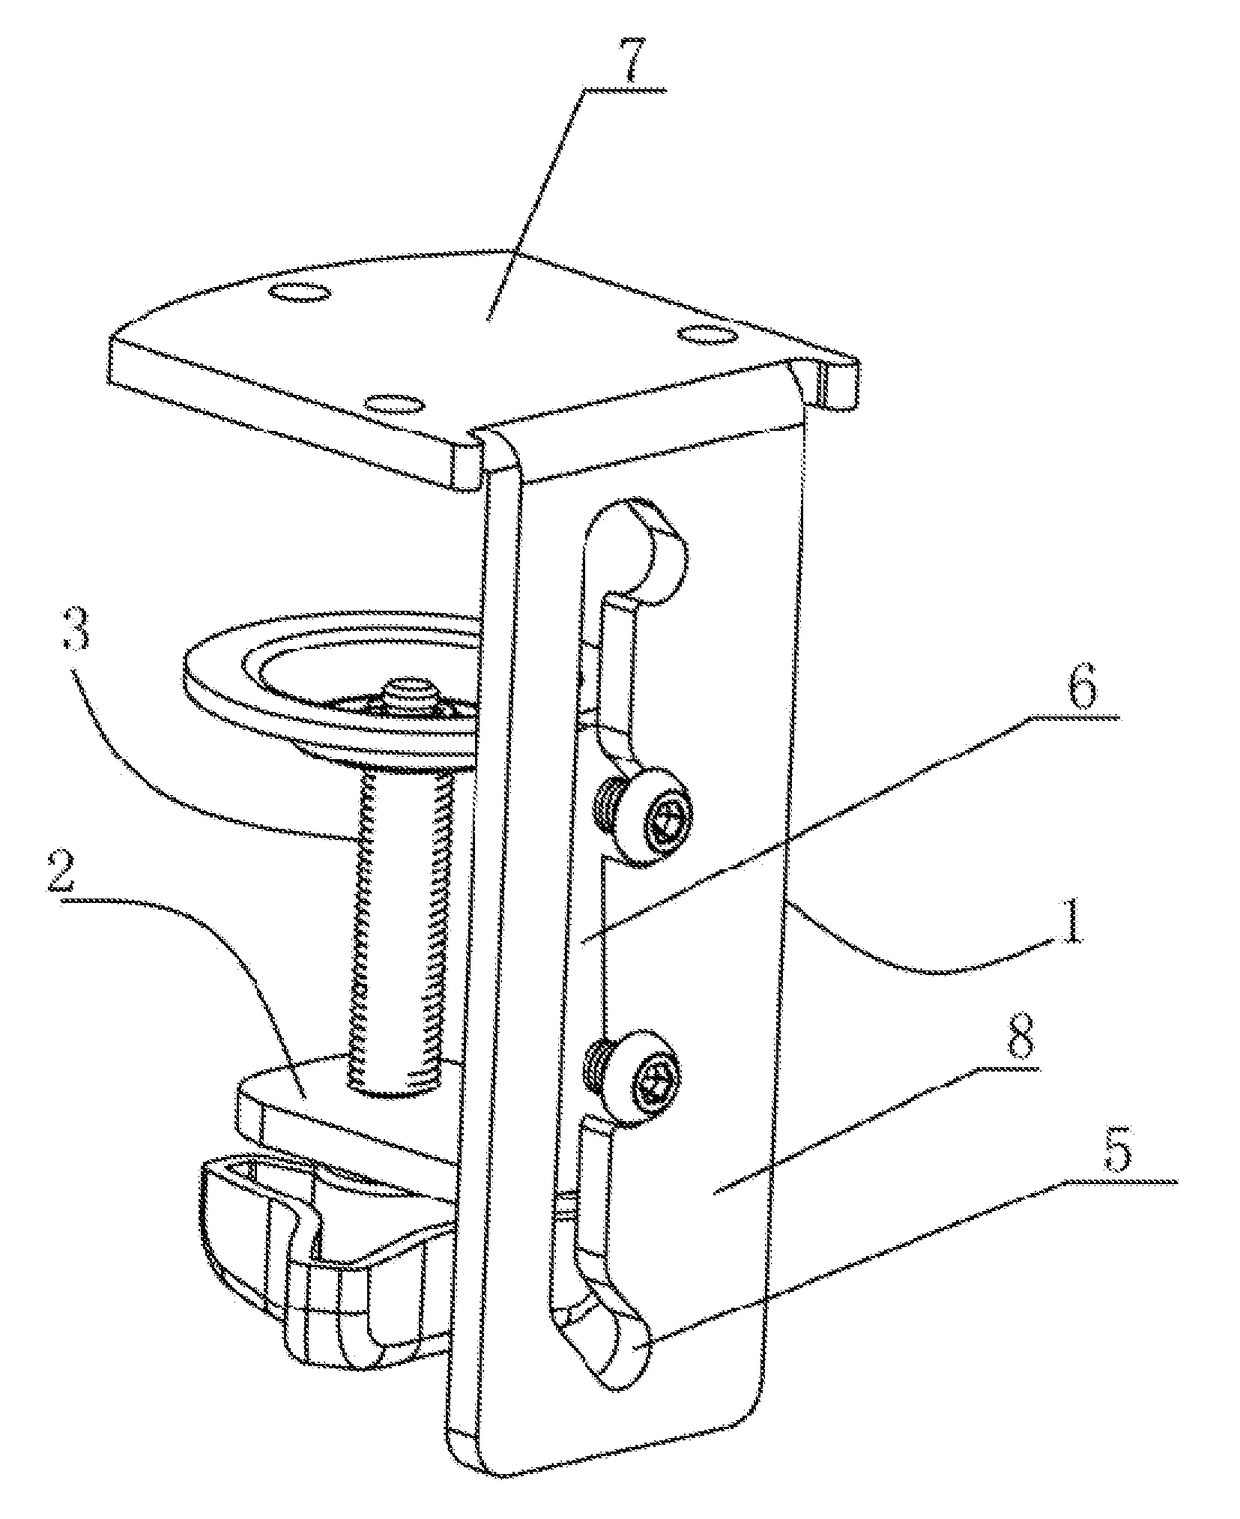 Clamping device for continuous adjustment of a display stand